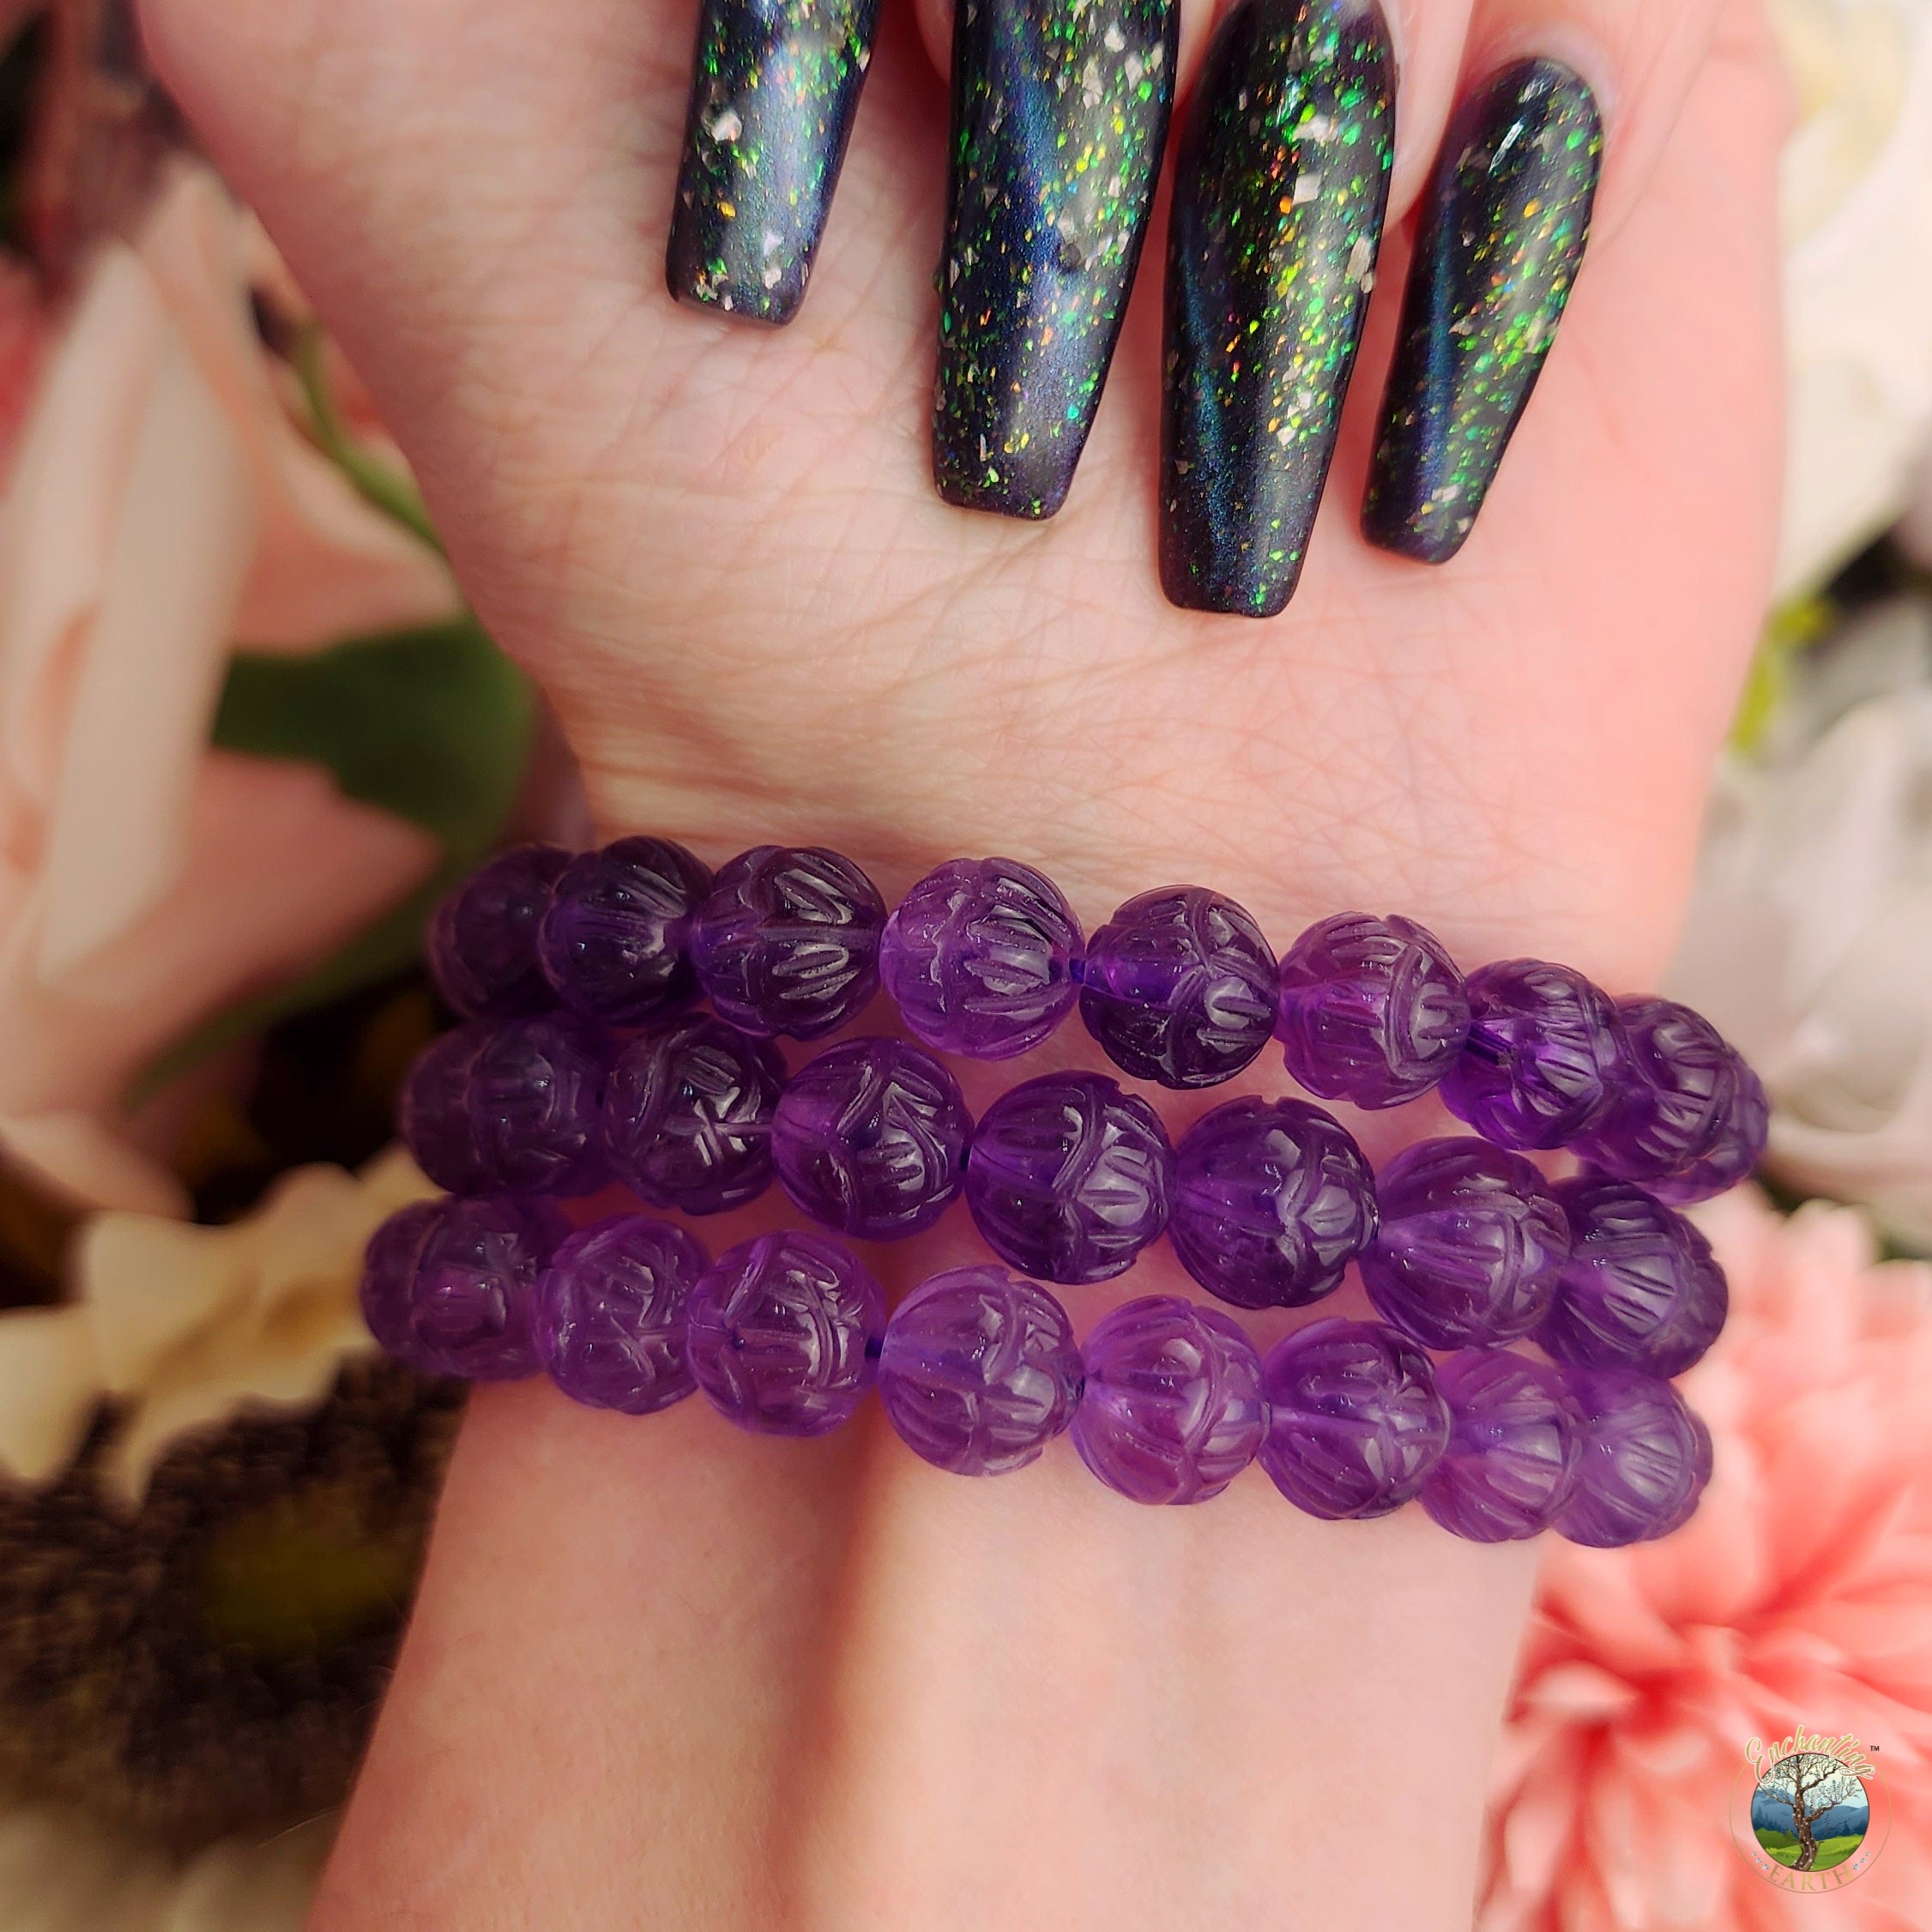 Amethyst Lotus Bracelet for Intuition, Connection with the Divine and Sobriety